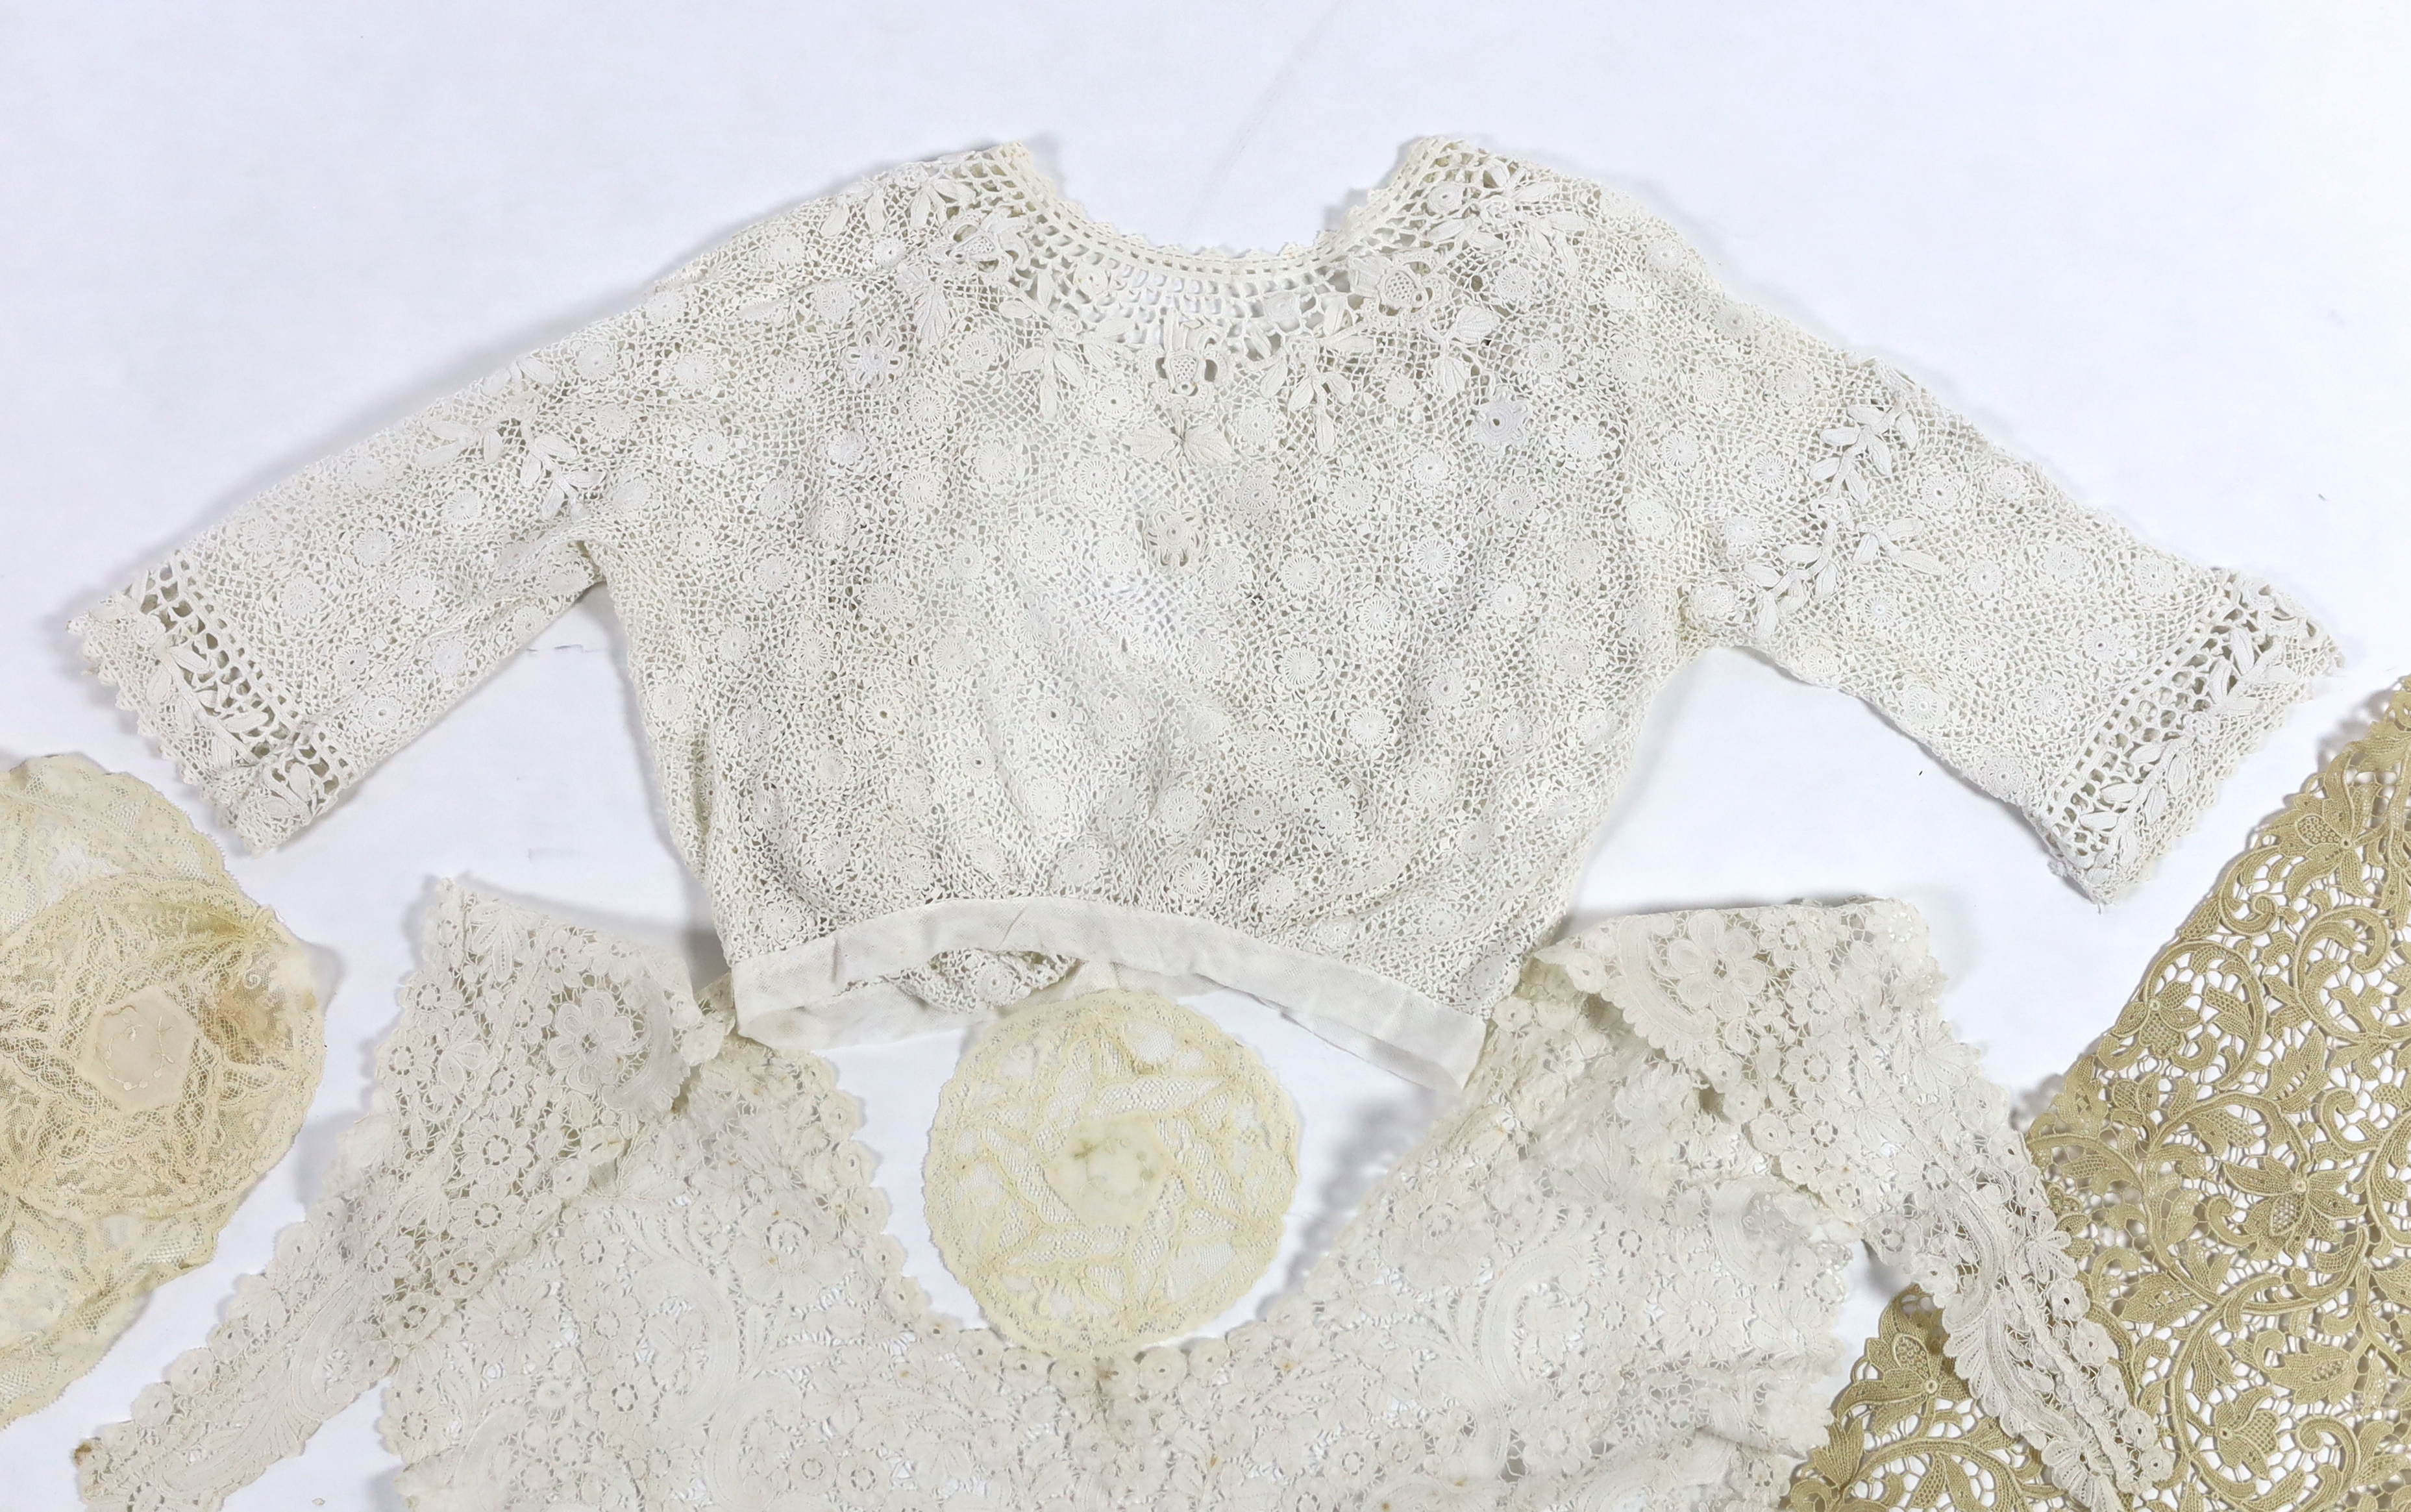 An Edwardian handmade Irish crocheted ladies blouse (small size), a Brussels hand bobbin lace Bertha with Point de Gaze insertions, two large and one small Normandy lace mats, four large and two smaller similar needle la